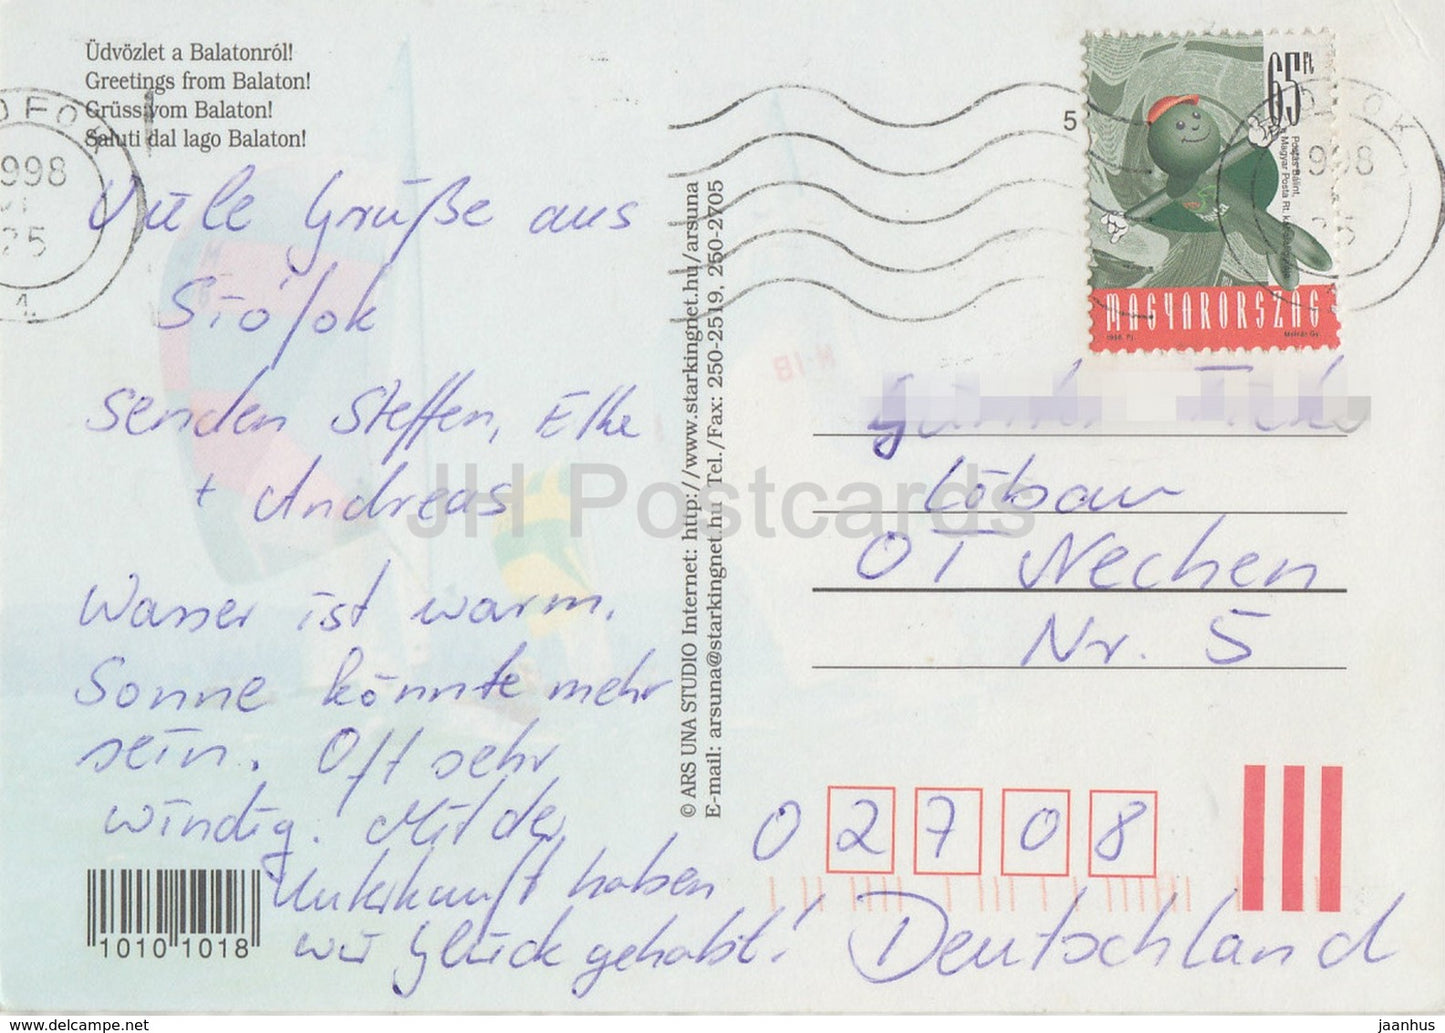 Greetings from Balaton - sailing boat - watermill - multiview - 1998 - Hungary - used